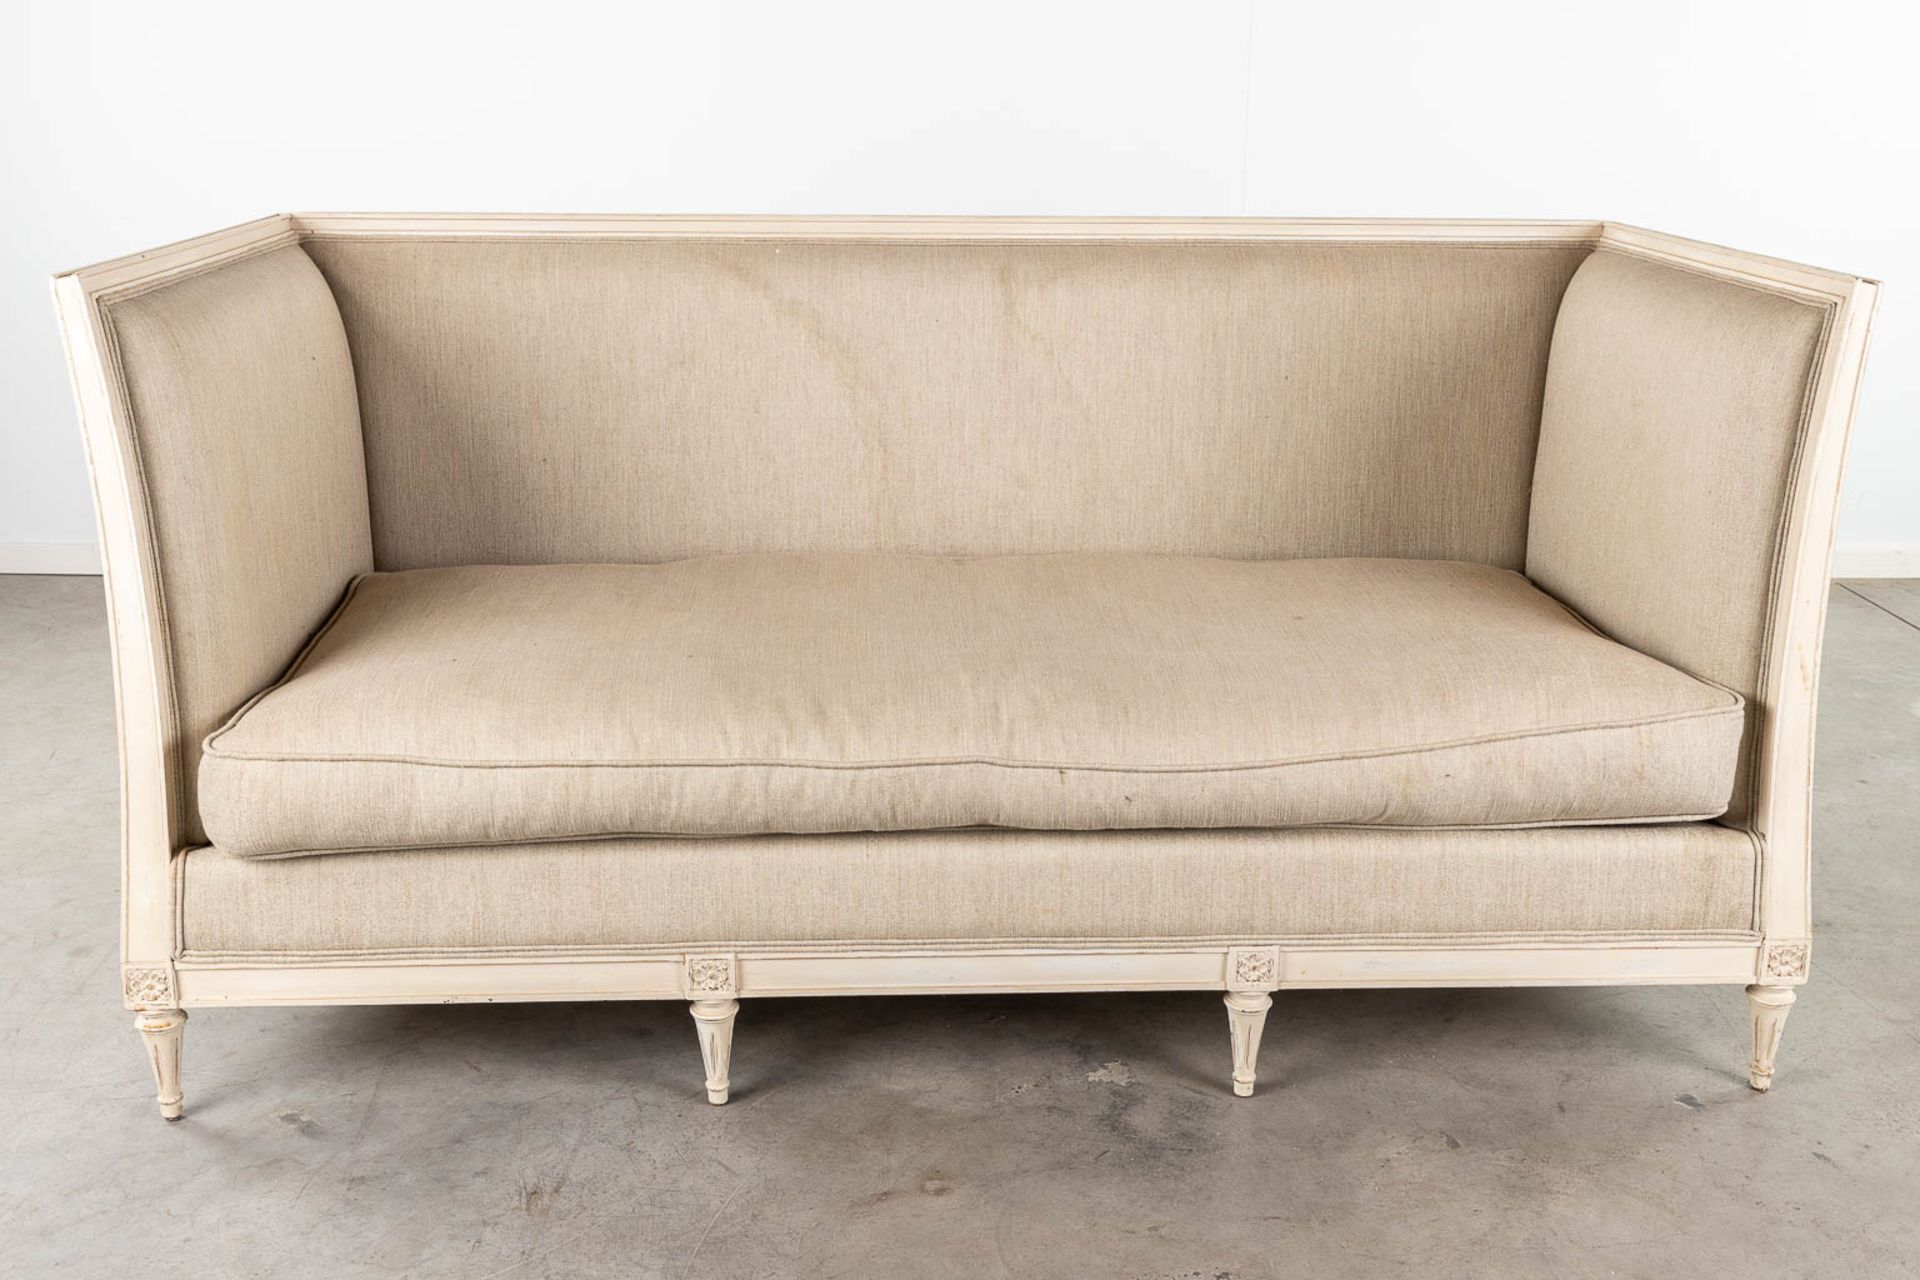 An antique settee with straight sides, Louis XVI style. (L: 84 x W: 188 x H: 90 cm) - Image 4 of 13